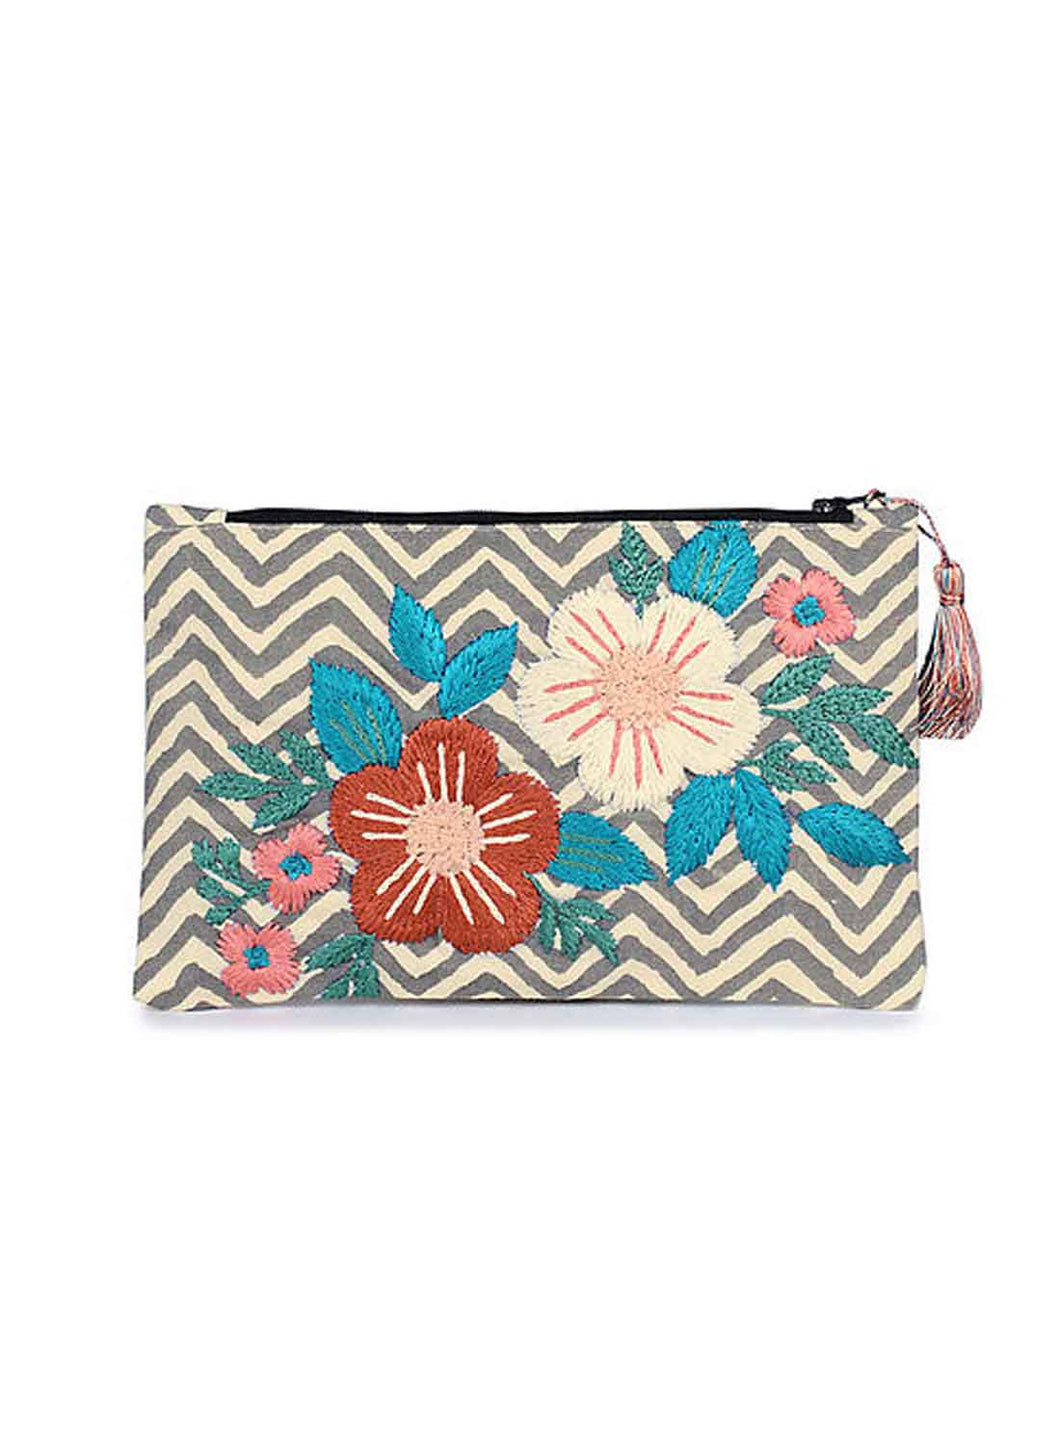 Kanyoga Embroidered & Printed Cotton Pouch With Tassel Attached For Women